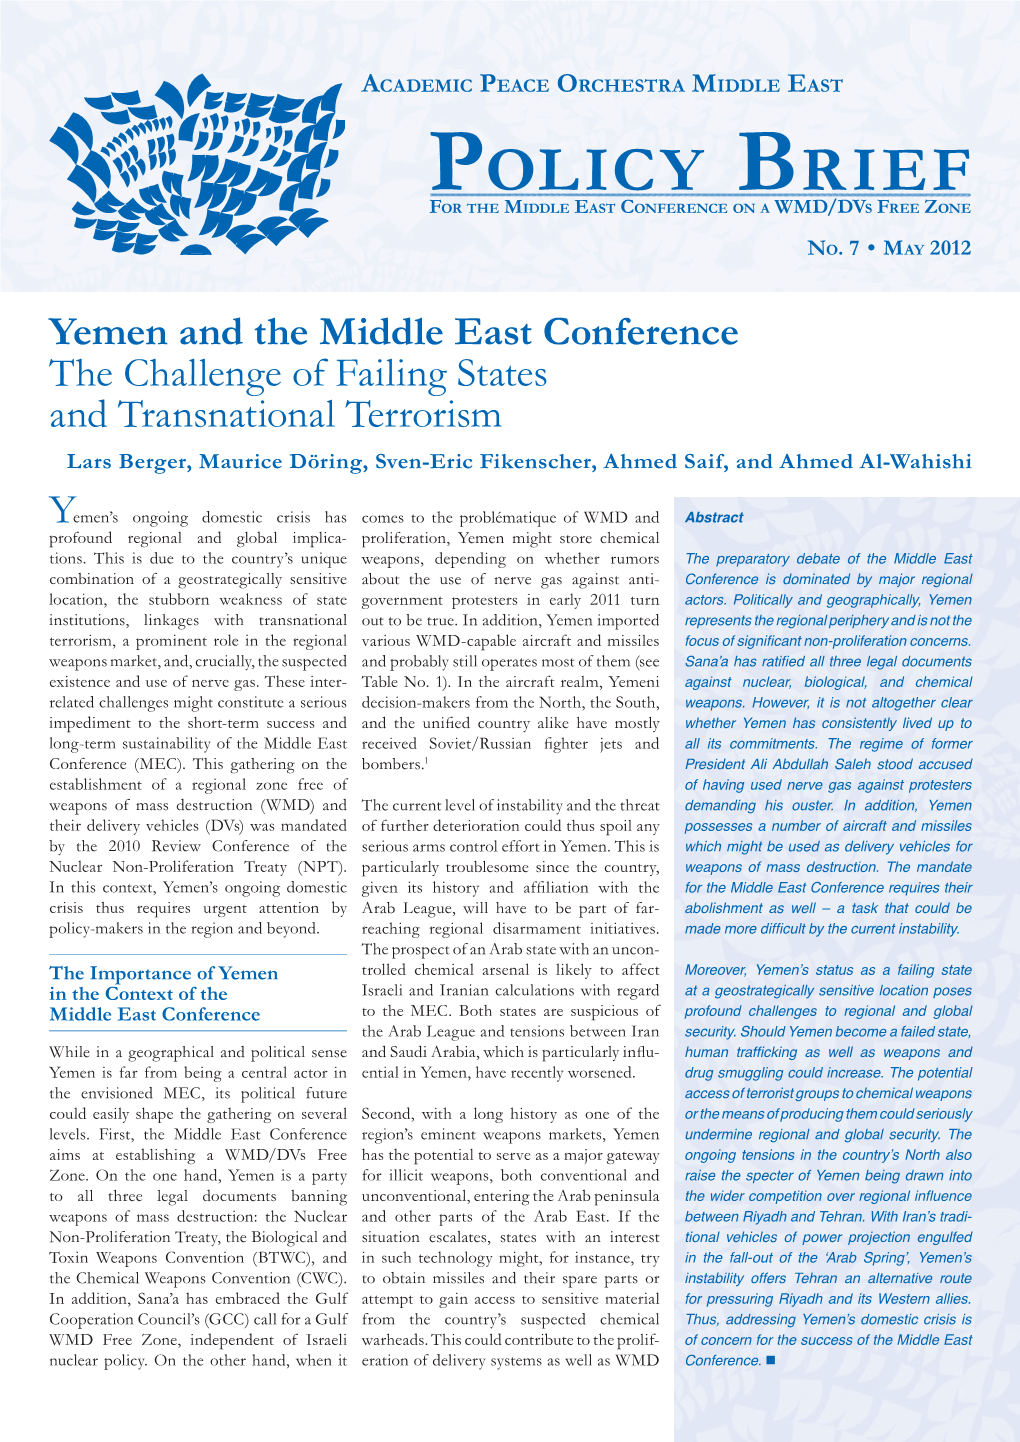 Yemen and the Middle East Conference : the Challenge of Failing